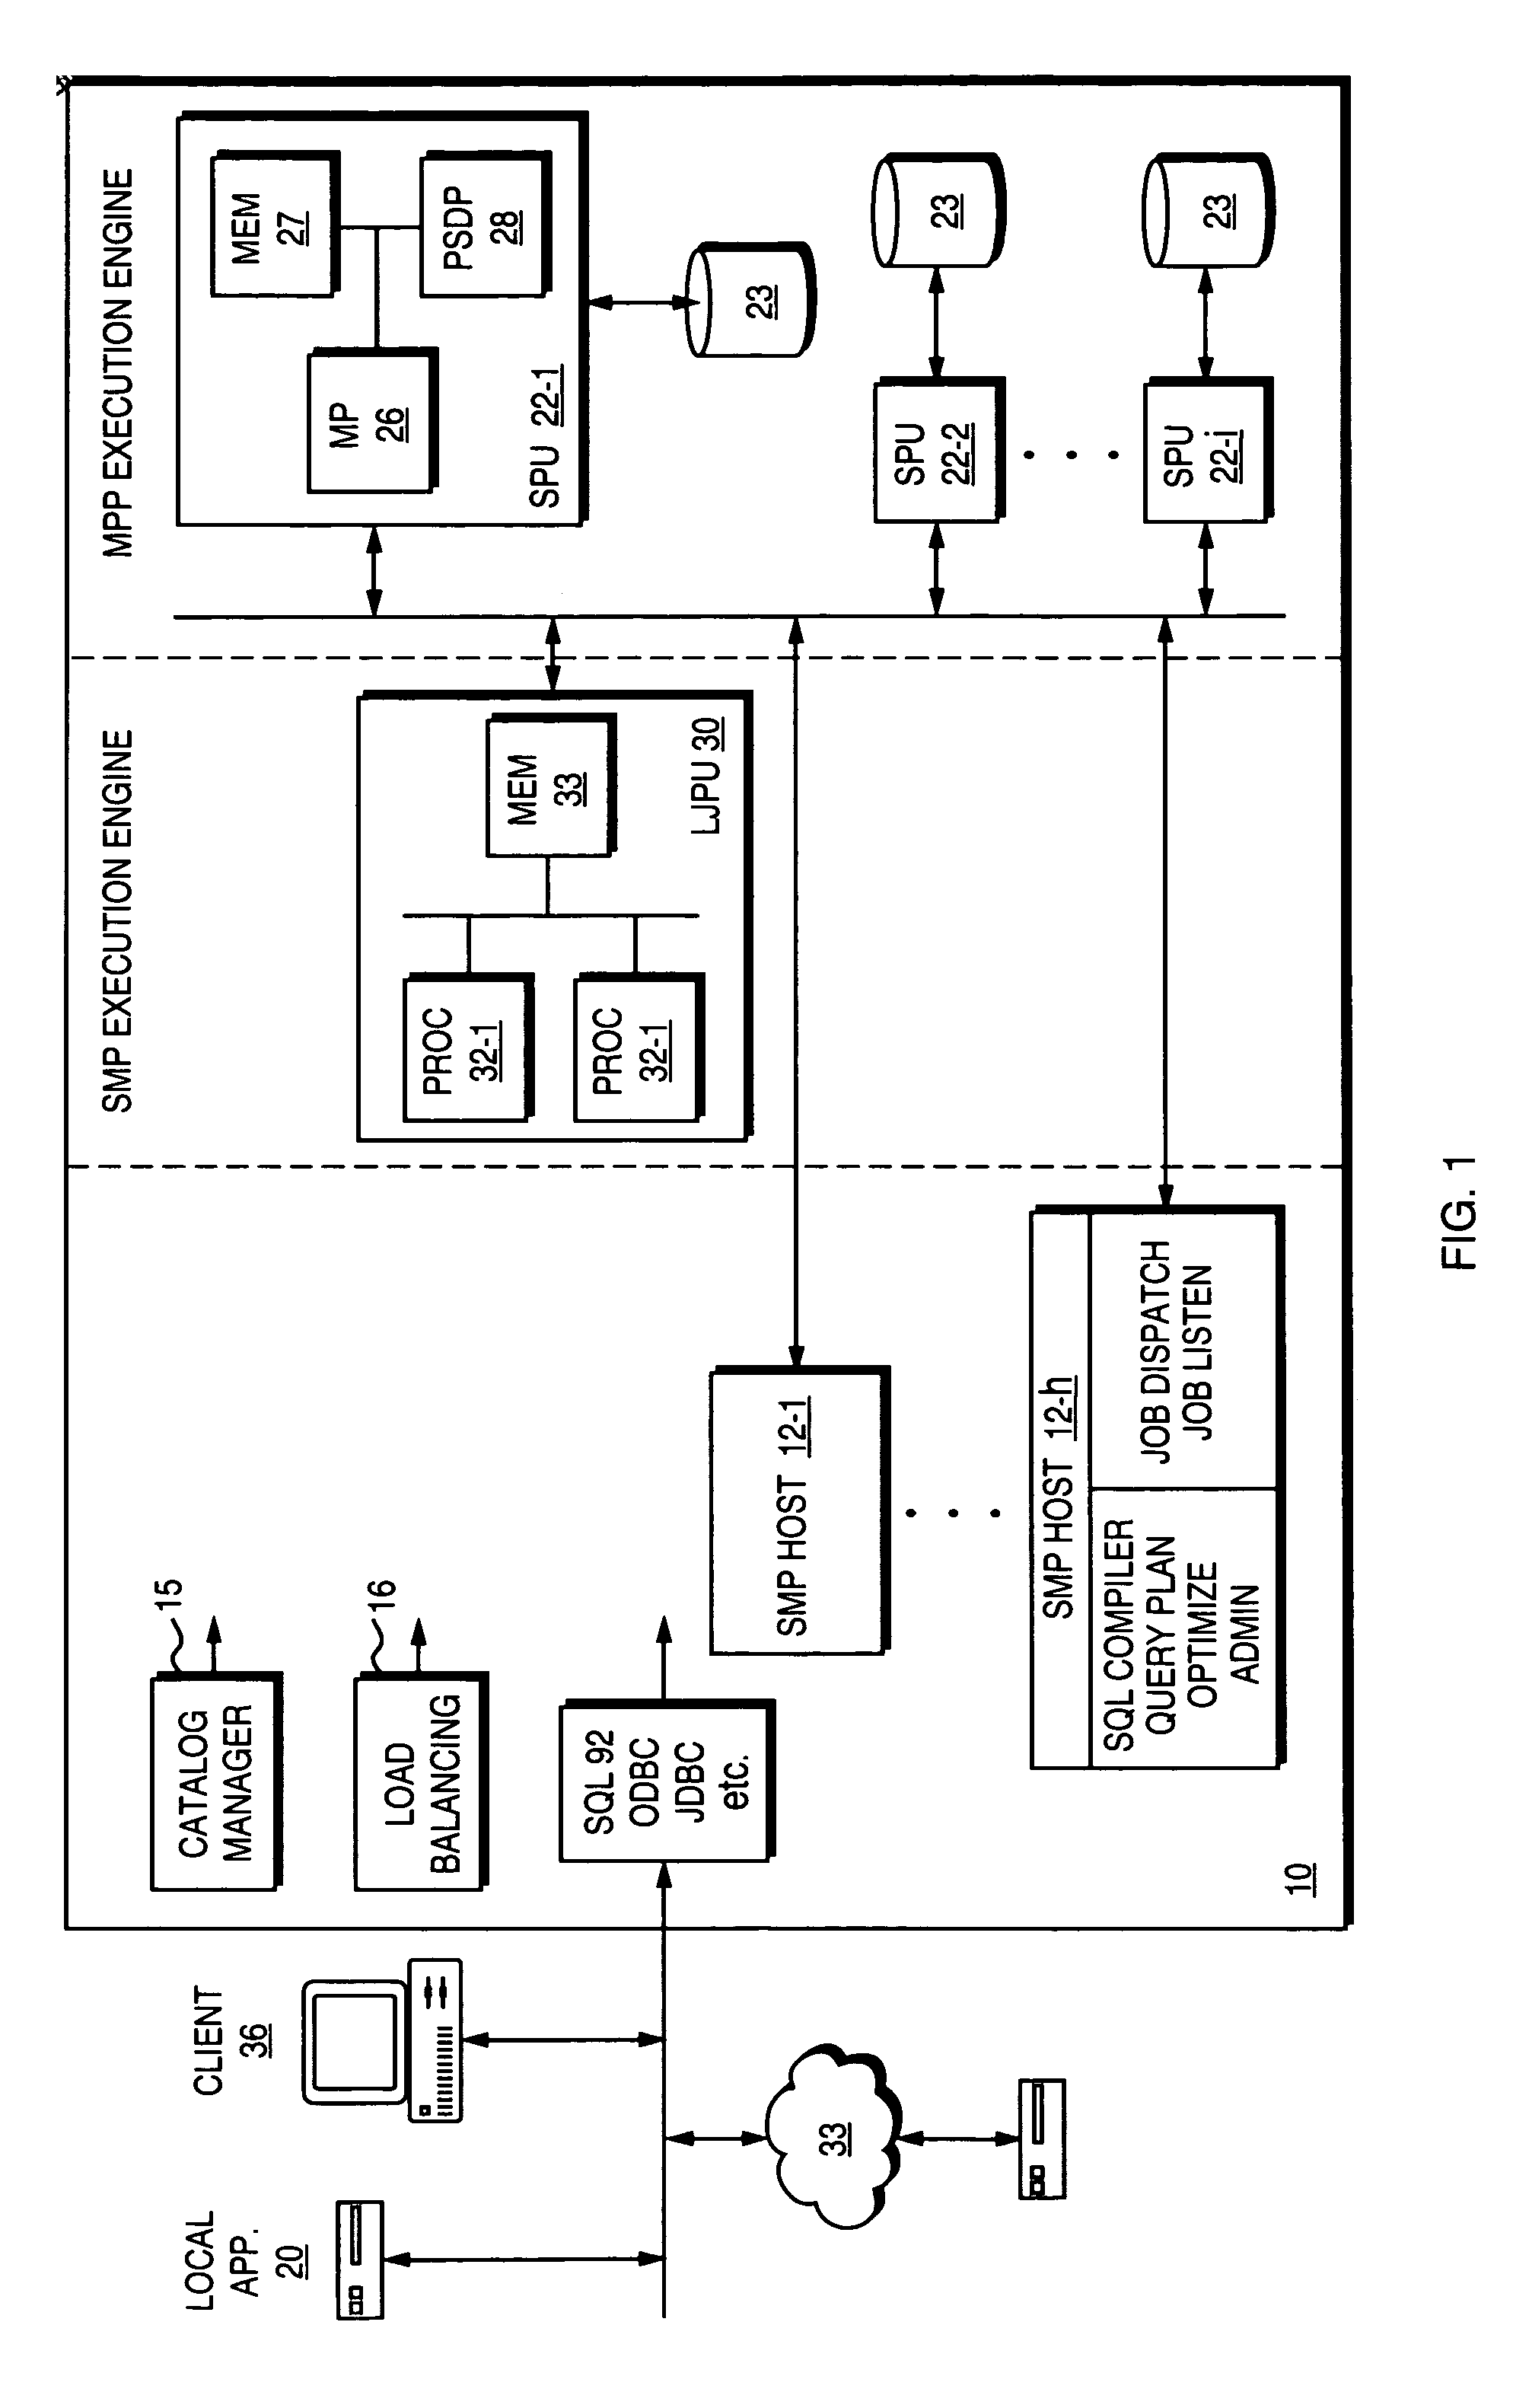 Performing sequence analysis as a multipart plan storing intermediate results as a relation